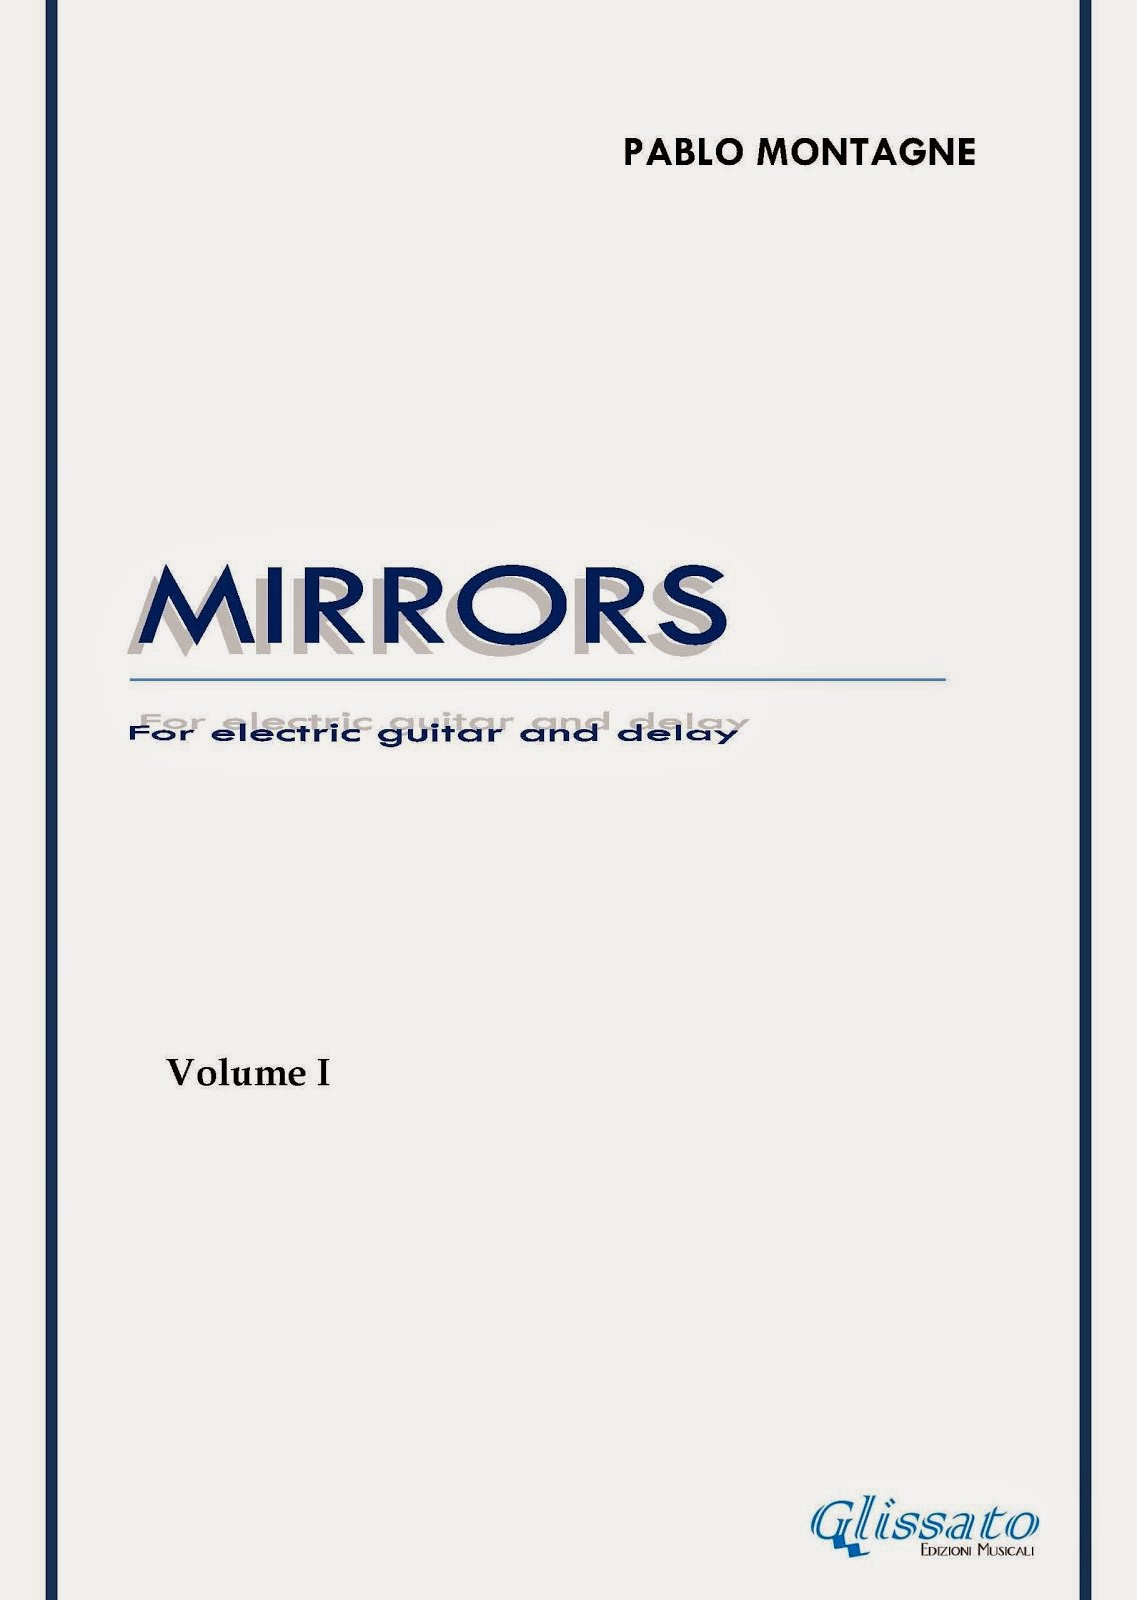 Mirrors by Pablo Montagne